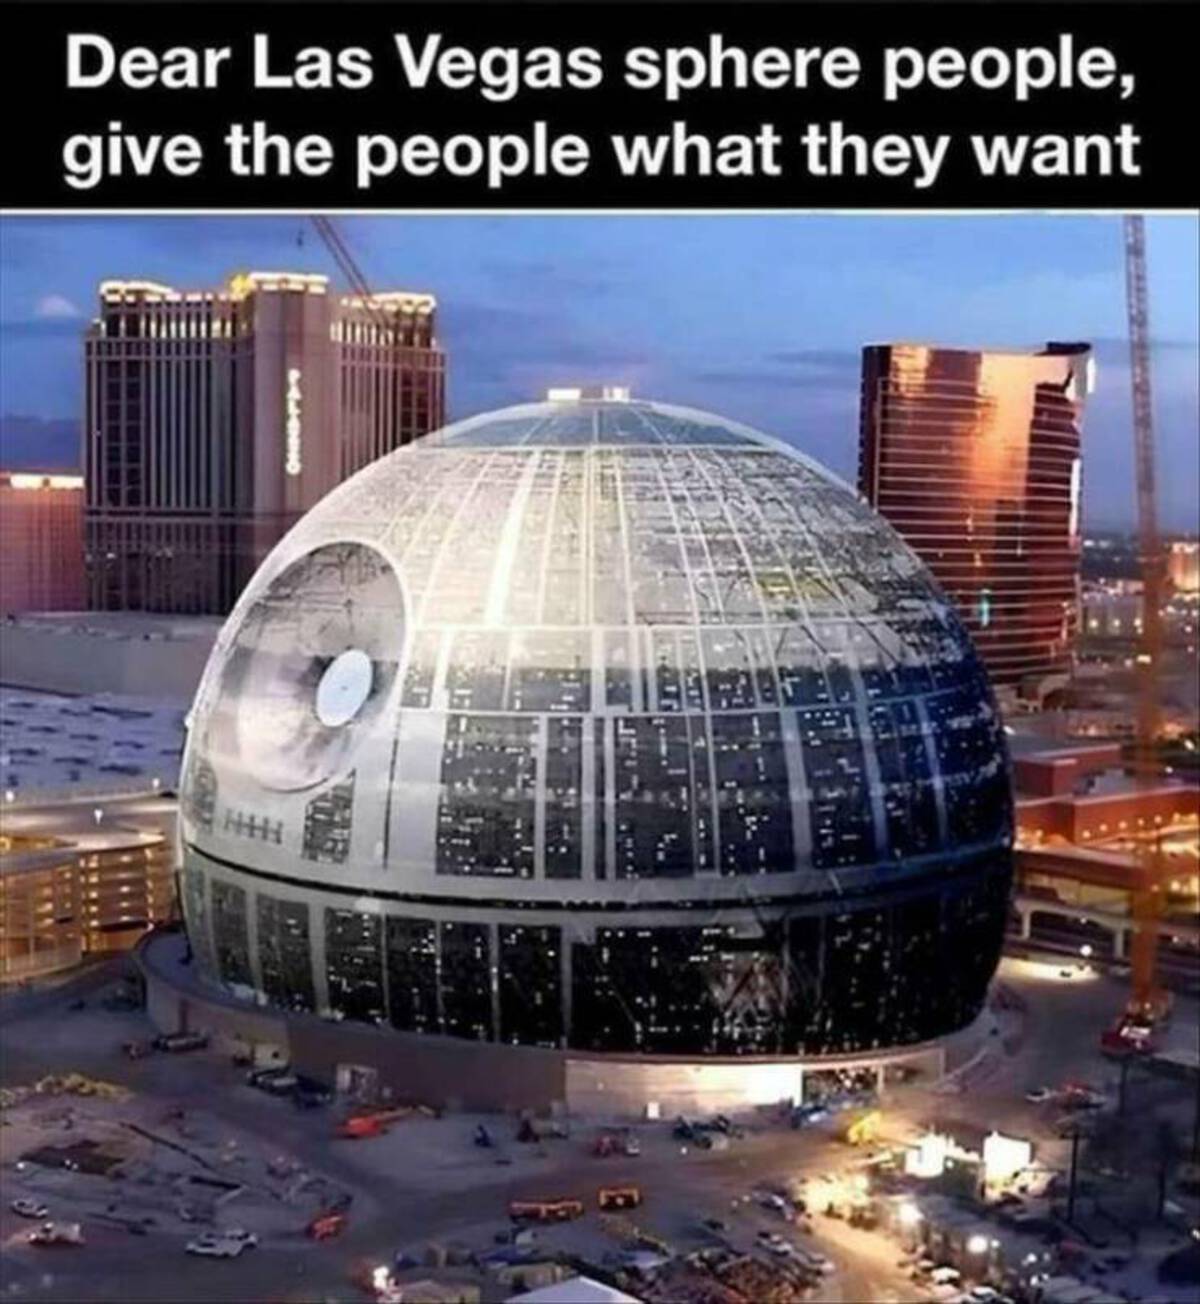 landmark - Dear Las Vegas sphere people, give the people what they want 4440